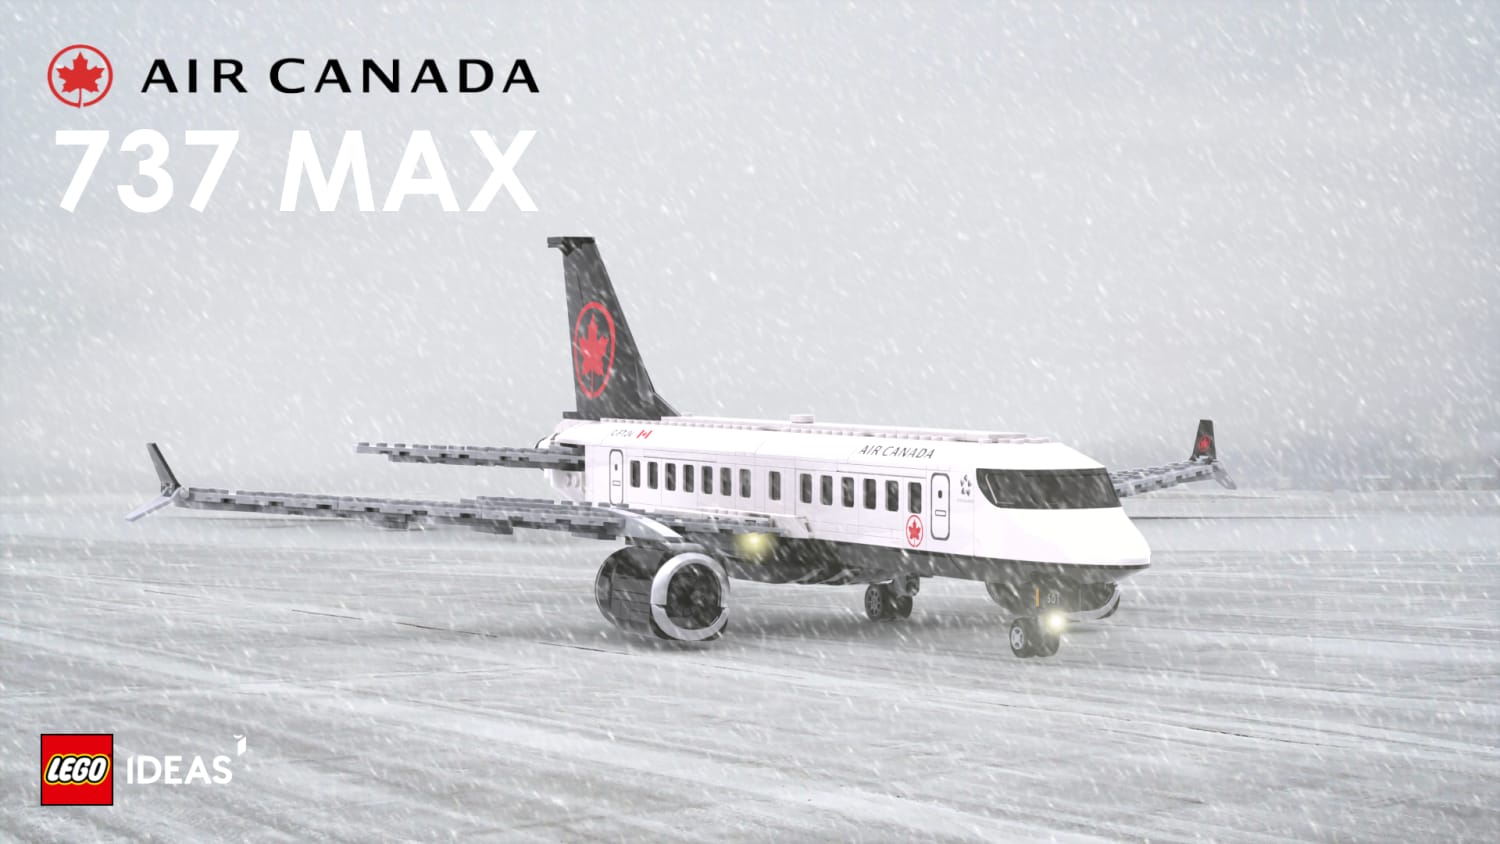 LEGO-built Air Canada 737 MAX model. Please support this project so it can become a real LEGO set!